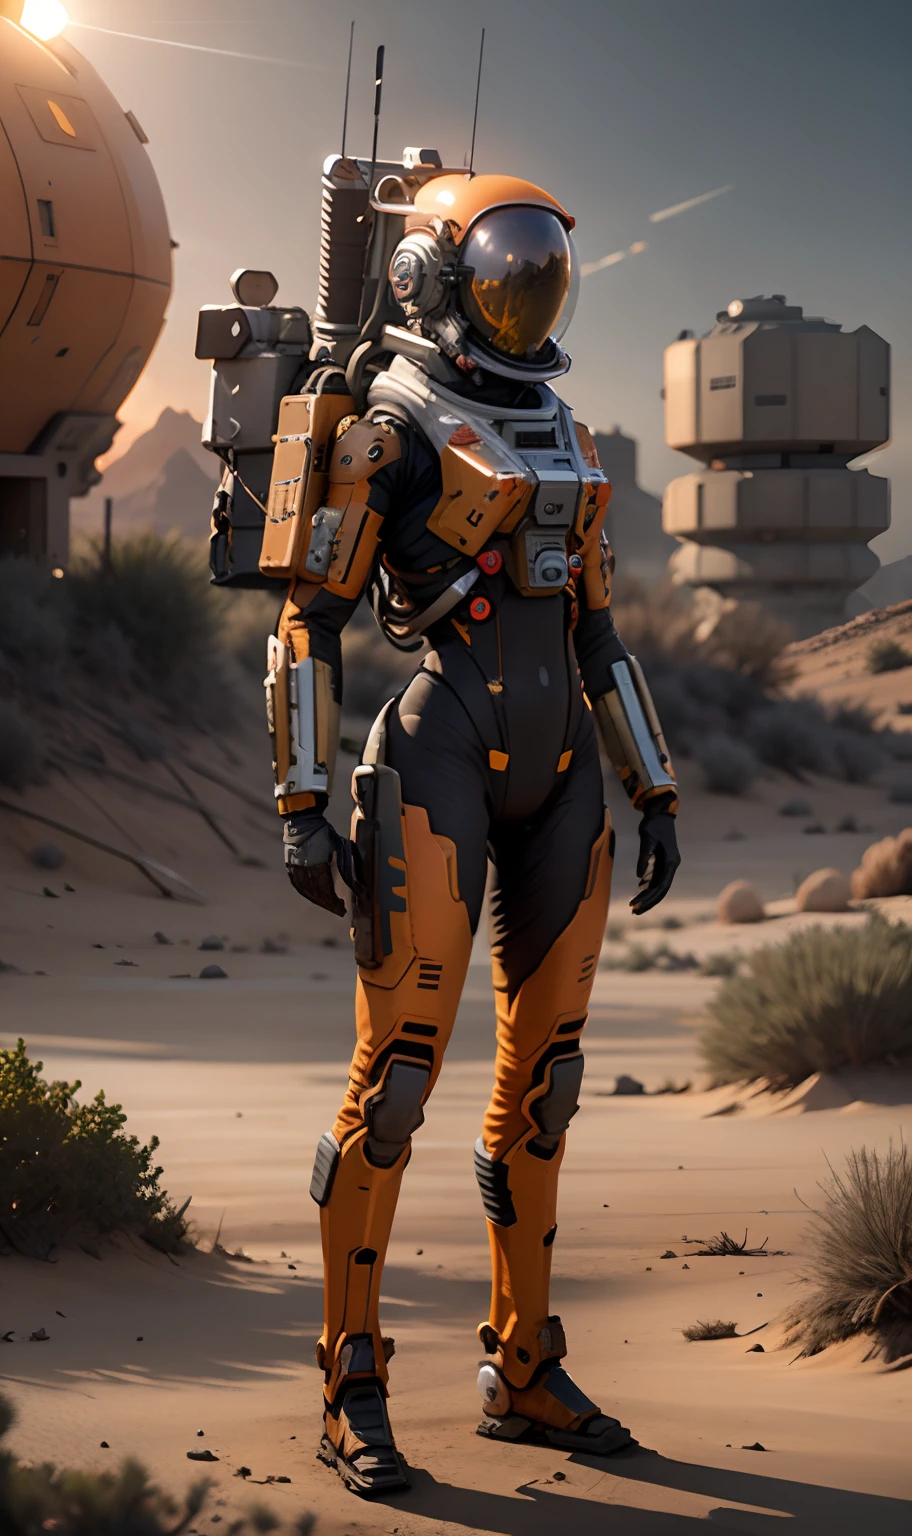 kit bashing, alien landscape, jungle, solitary female astronaut, radio dish antenna, Tangerine Orange, utility belt, Pebble Gray Chrome, sci-fi, masterpiece, 16k, UHD, HDR, the best quality, body-tight suit, intricate, the most fantastic details, cinematic composition, dramatic lighting, full body, celestial bodies in the sky, dead trees, dry bushes, realistic reflections, sunset, a military compound, to scale, , sad, dynamic posture